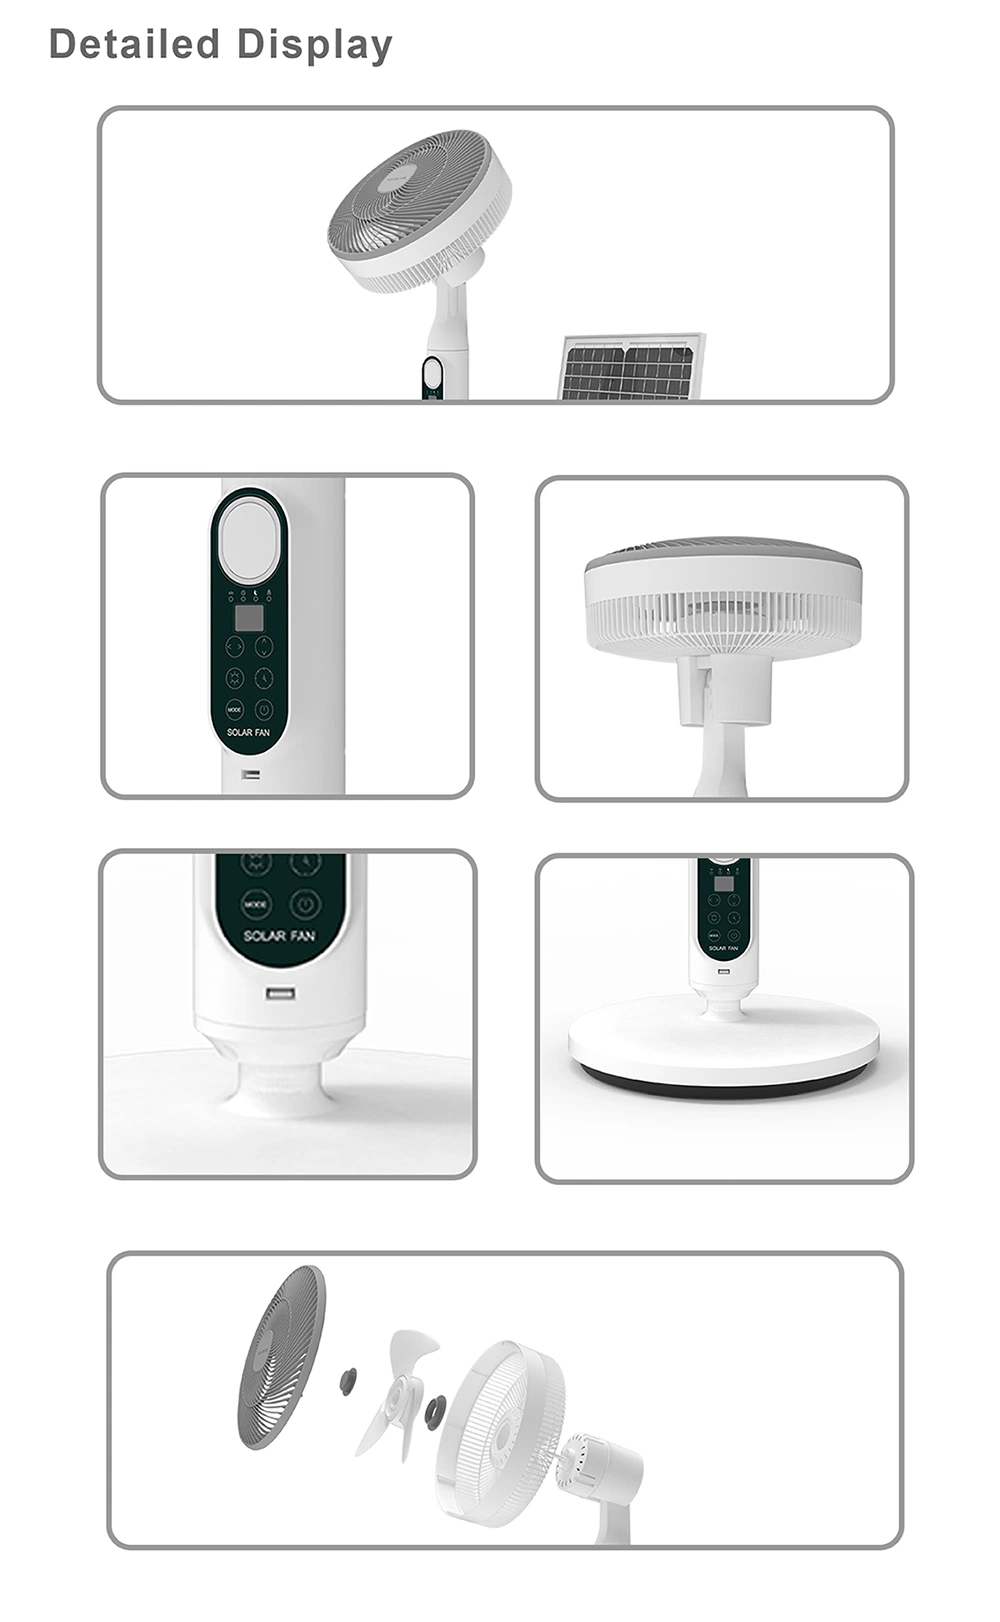 Air Circulator 360 Degree Circulation Fan, Evaporative Air Cooler and Tower Fan, Oscillating Bladeless USB Cooling Fan Household Cooling Fan